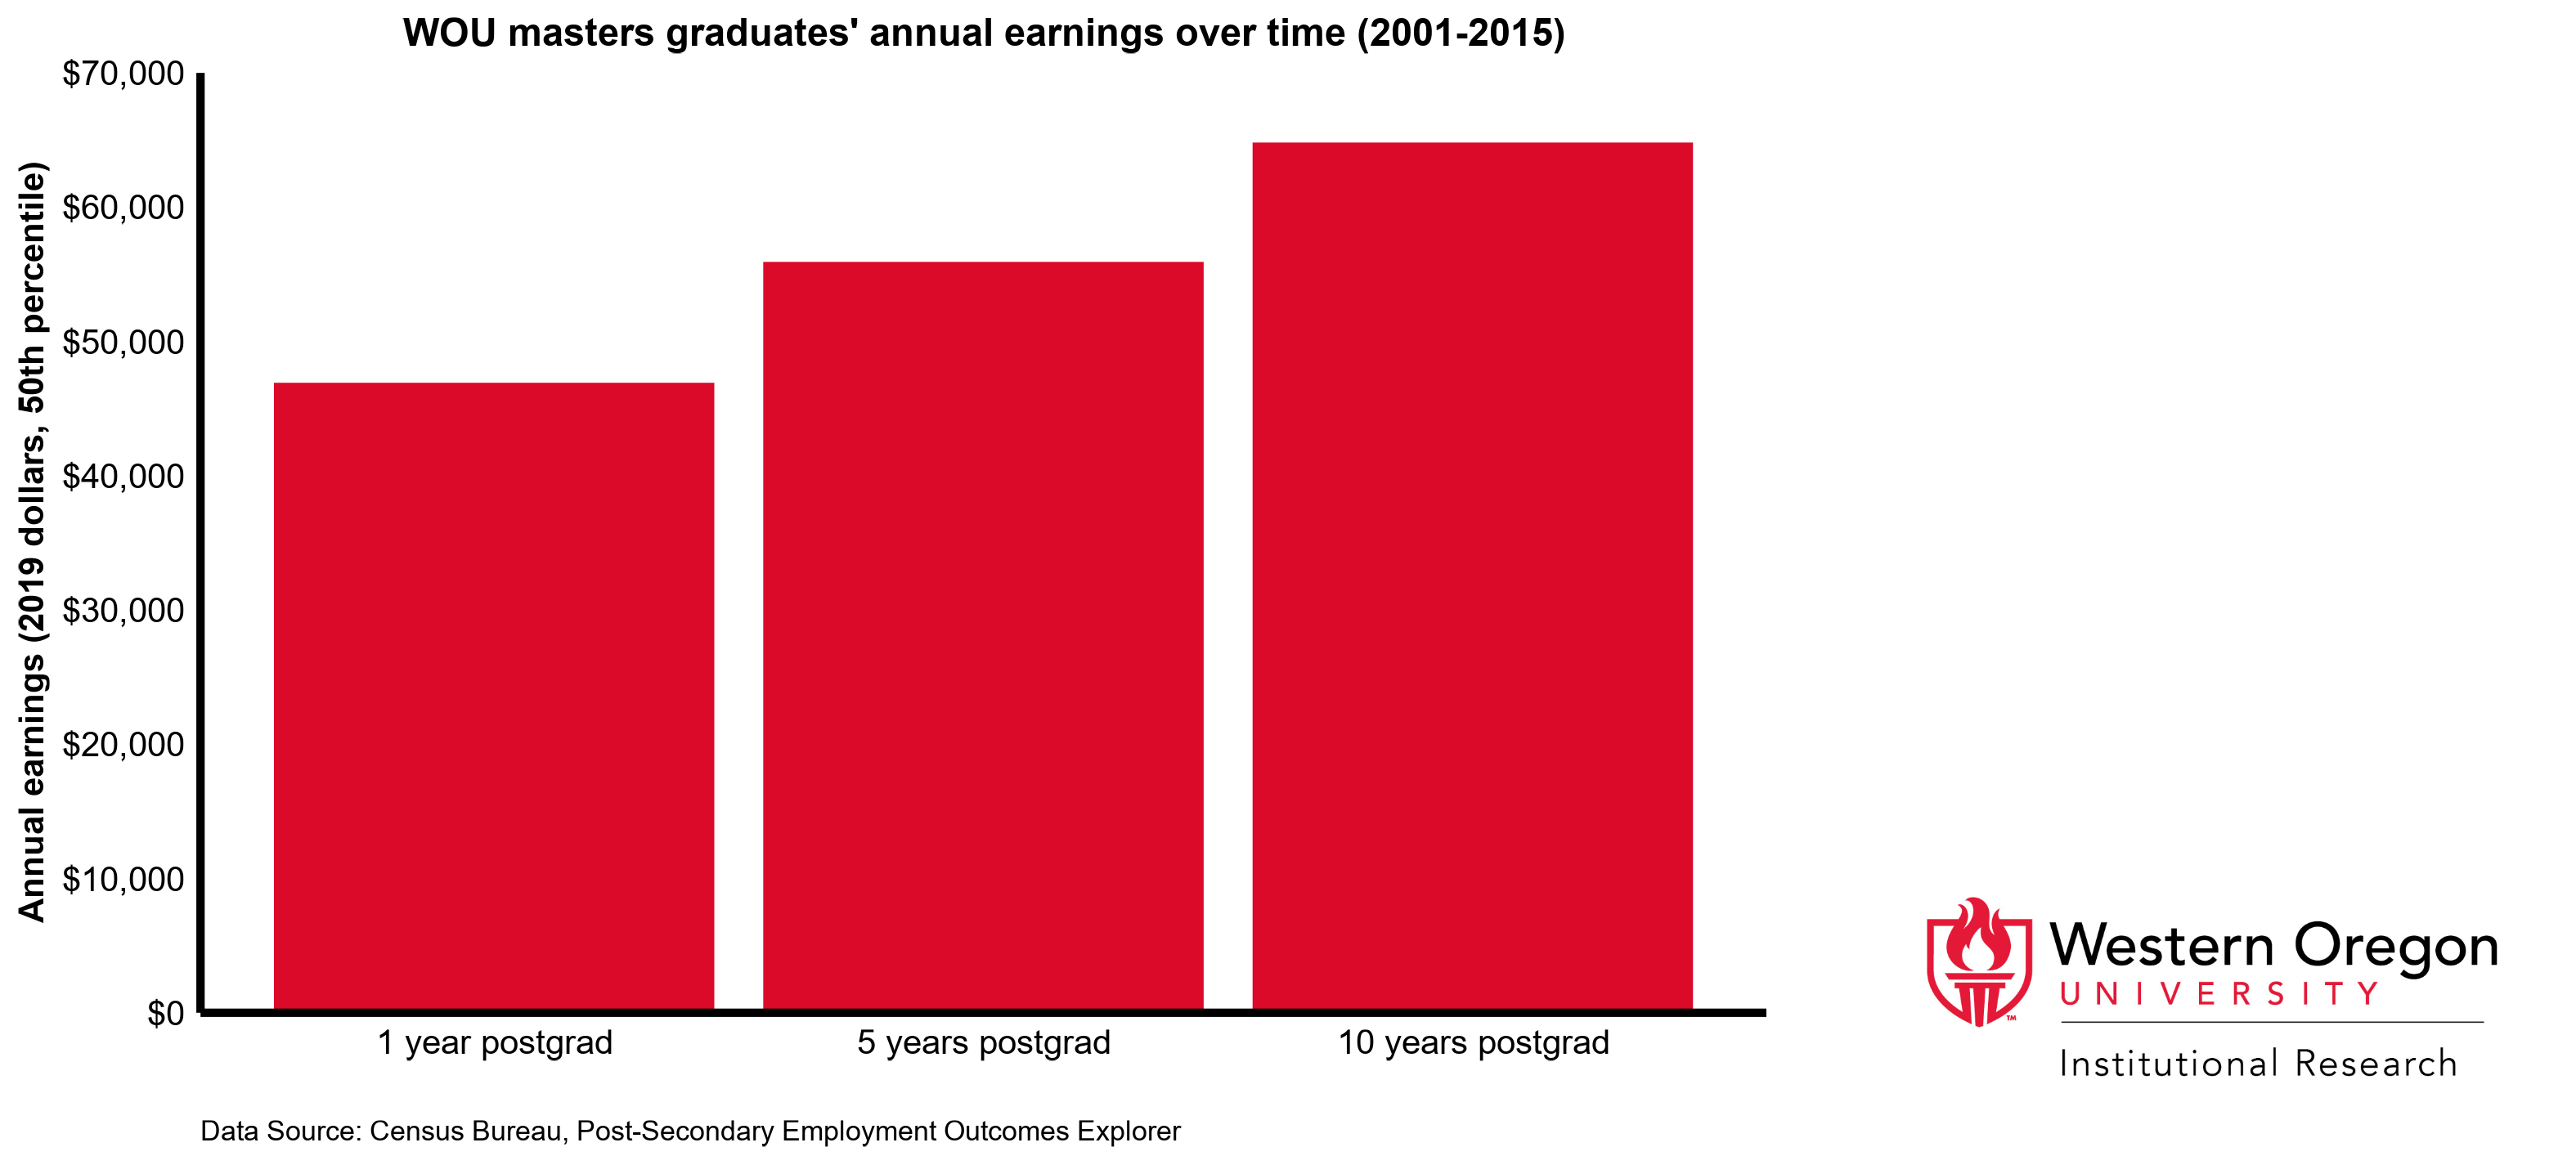 Bar chart of WOU masters graduates' annual earnings over time (2001-2015), showing that earnings increase over time.